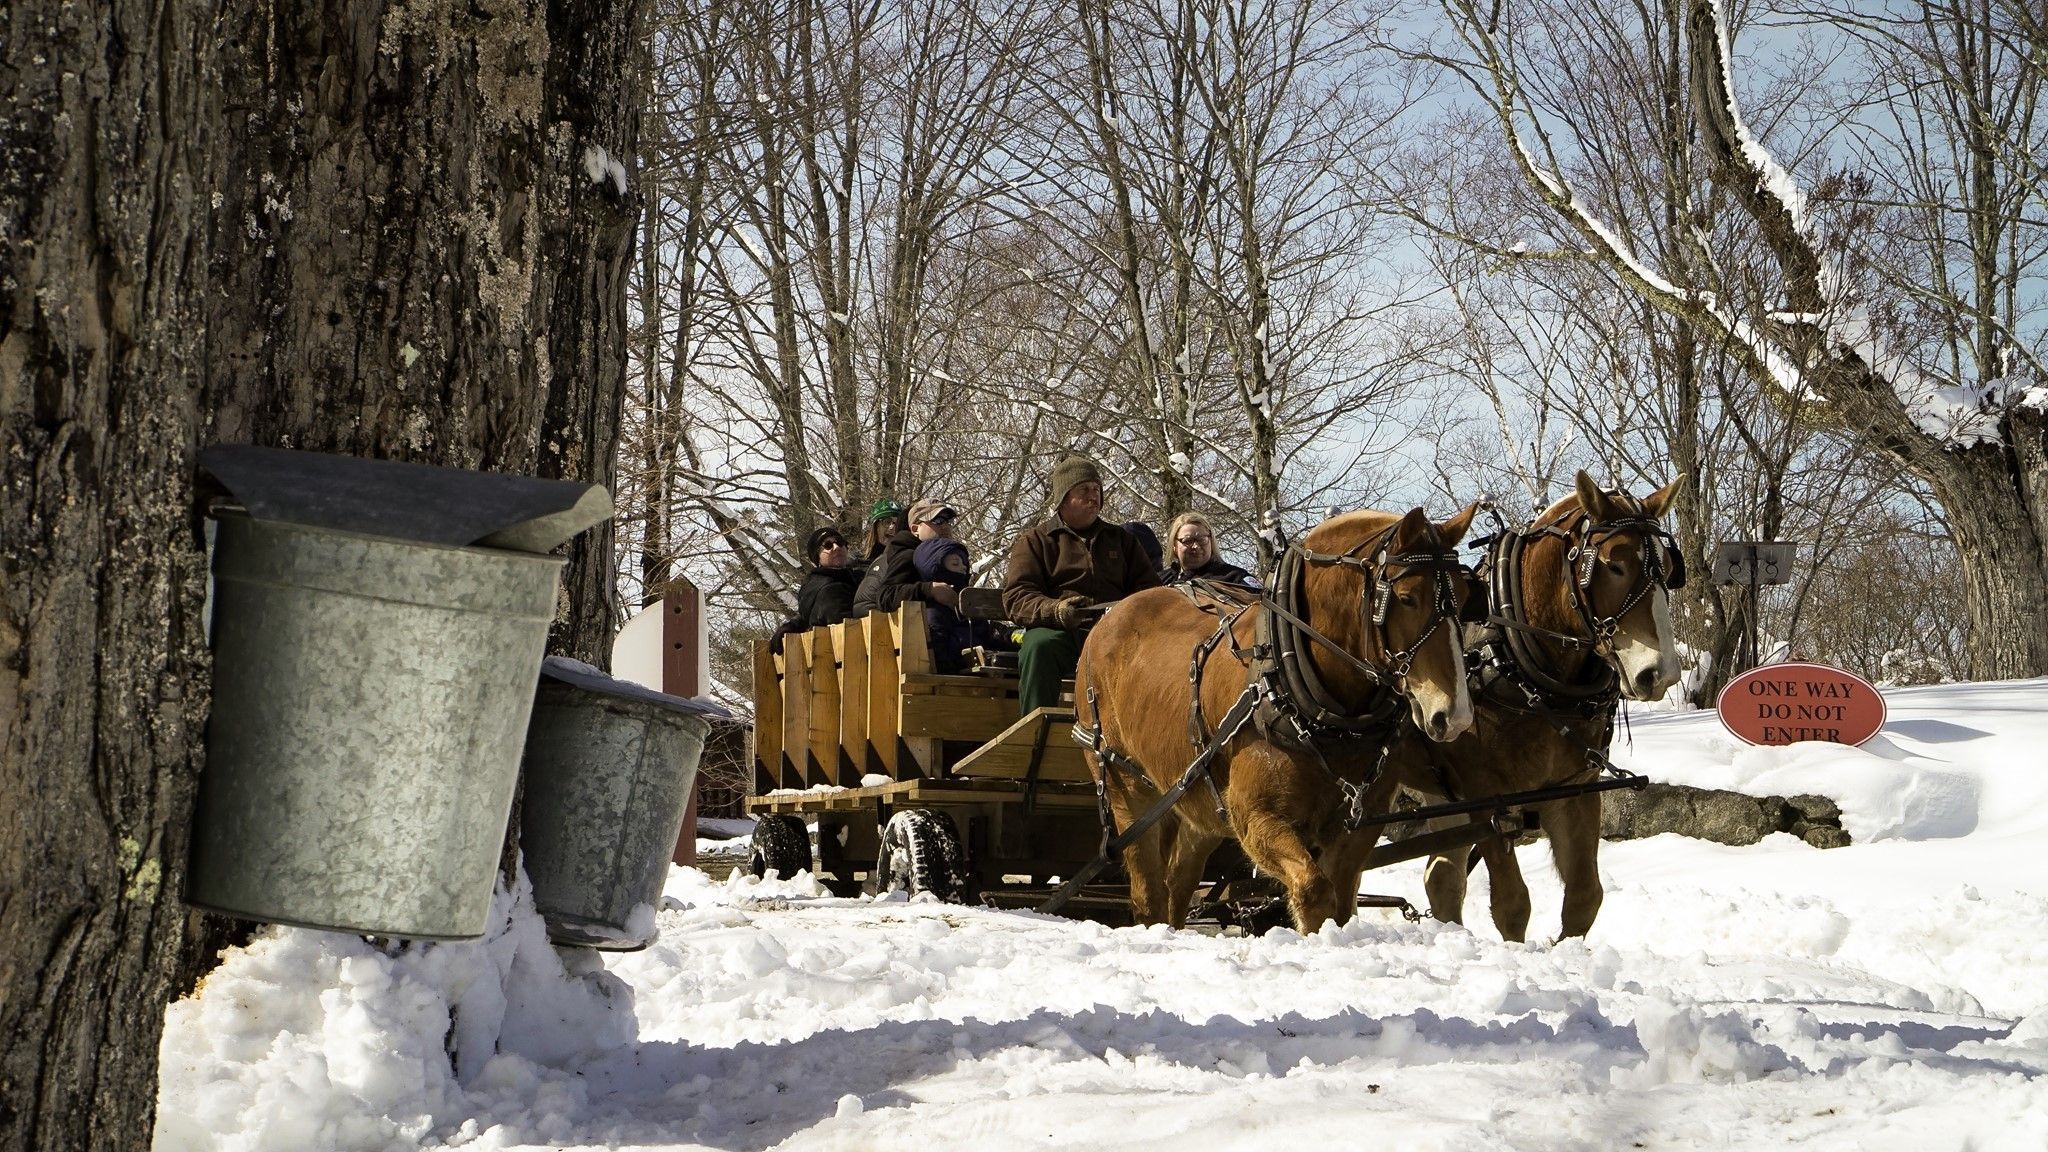 A horse-drawn wagon with adults and children passes by two maple trees with metal sap buckets attached on the snowy road at The Rocks.